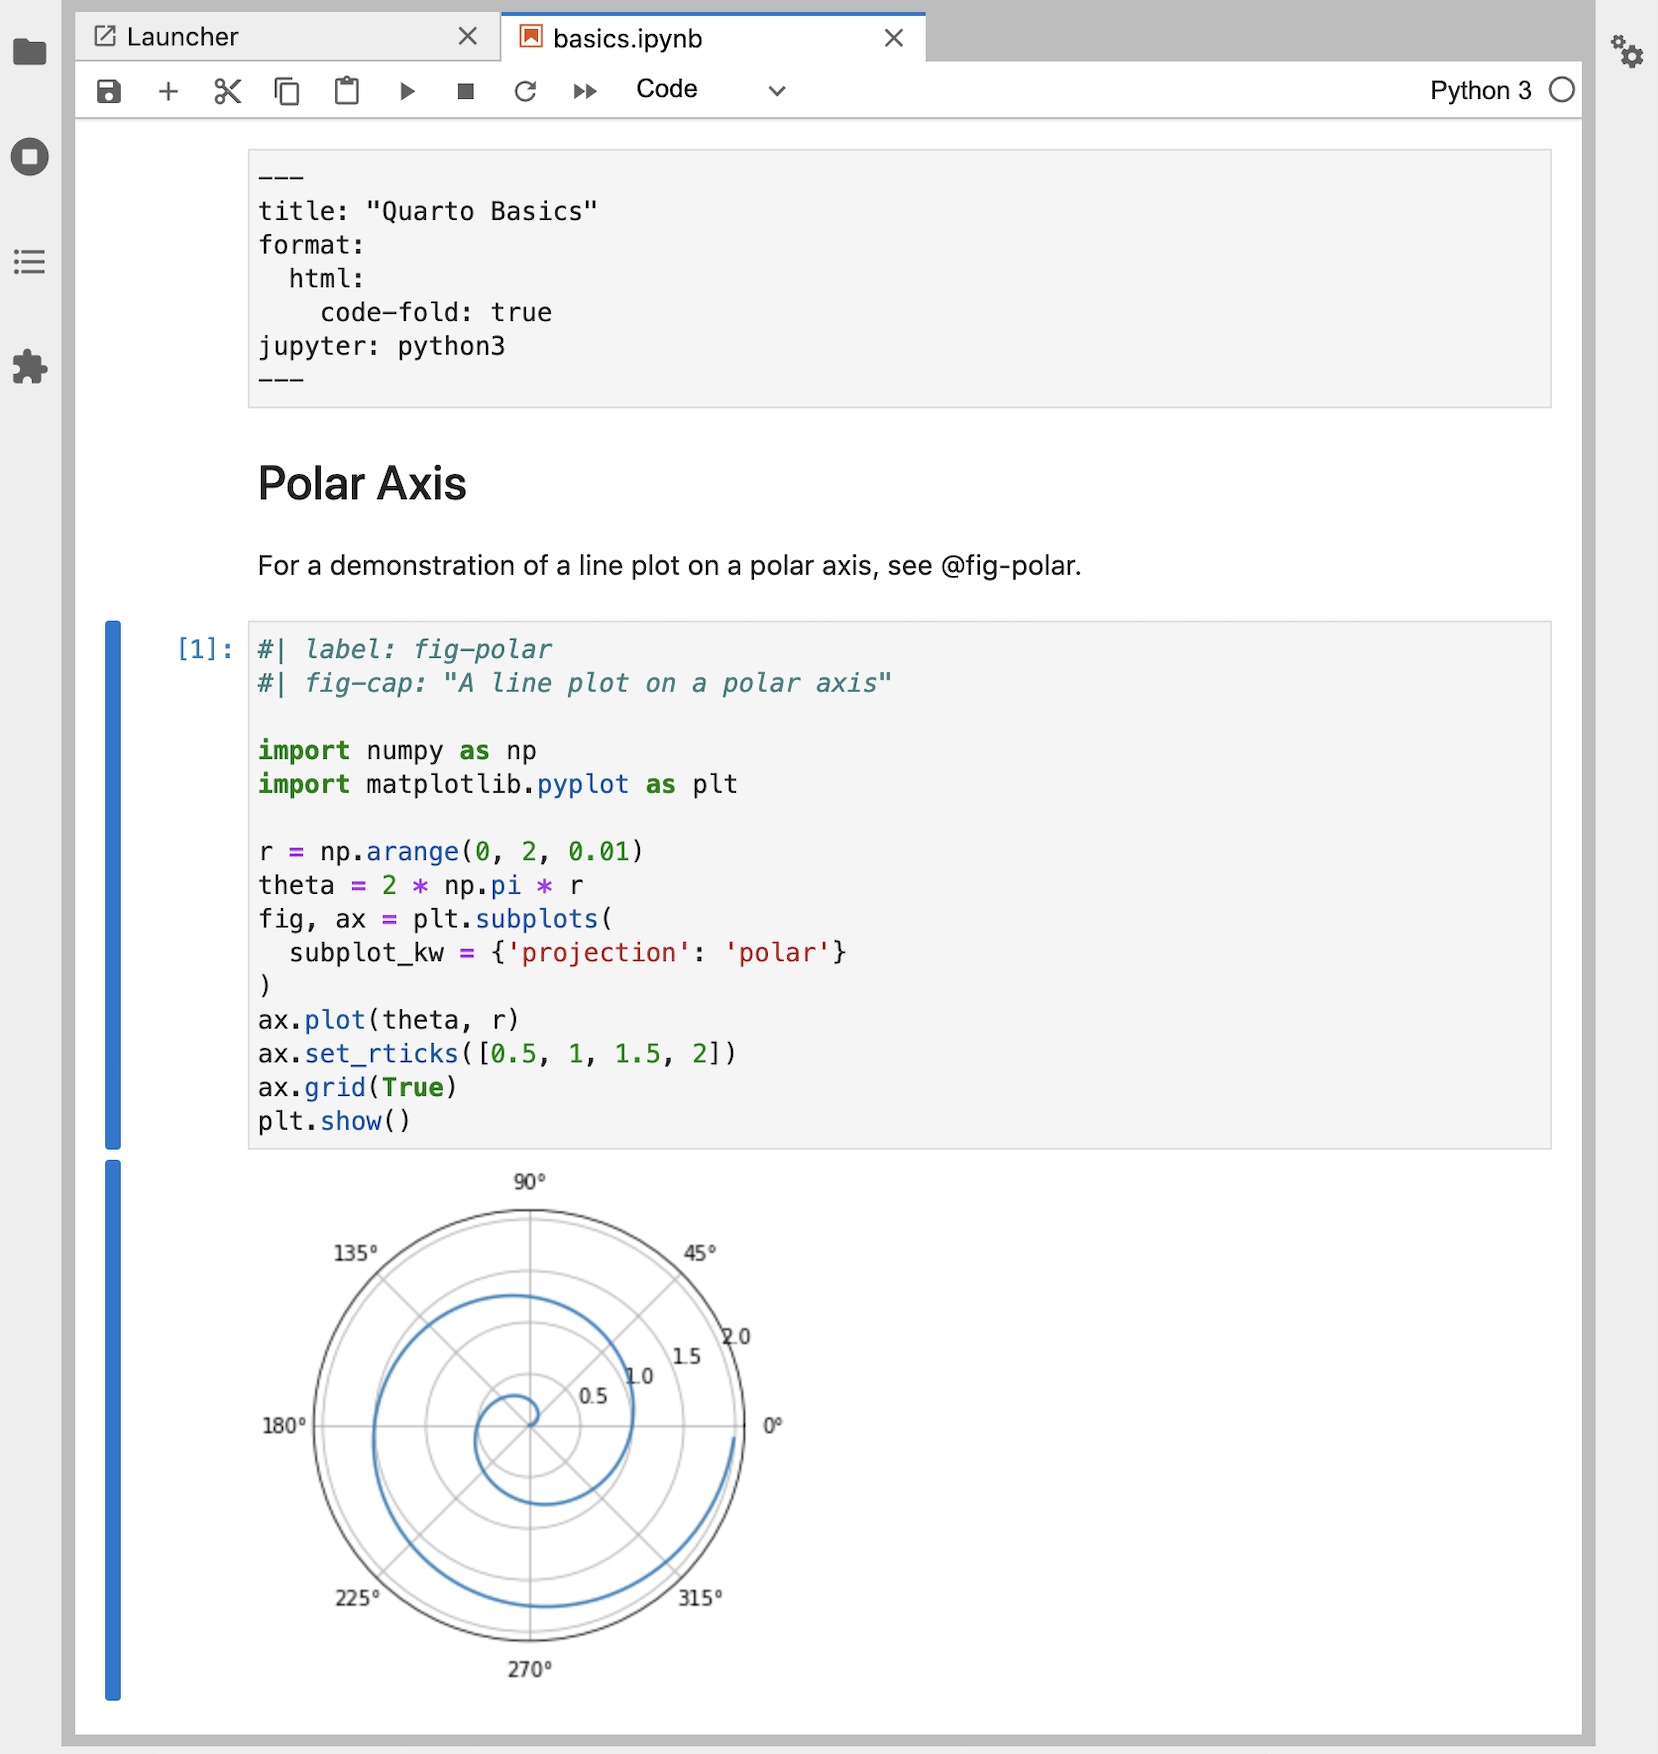 A Jupyter notebook titled Quarto Basics containing some text, a code cell, and the result of the code cell, which is a line plot on a polar axis.